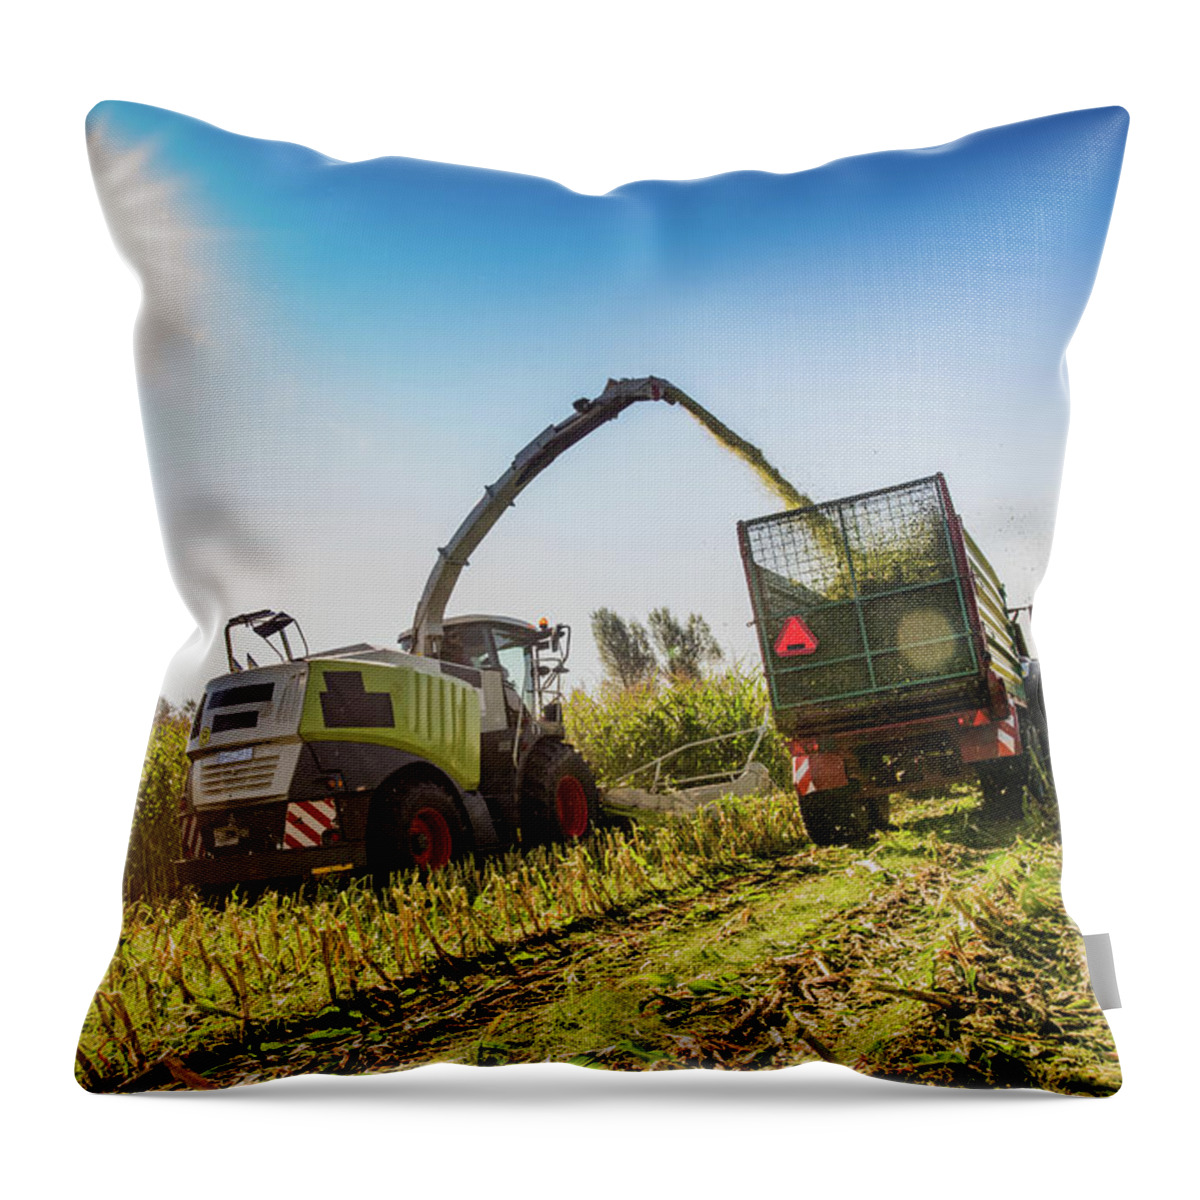 Dust Throw Pillow featuring the photograph Harvesting In Field by Simonkr